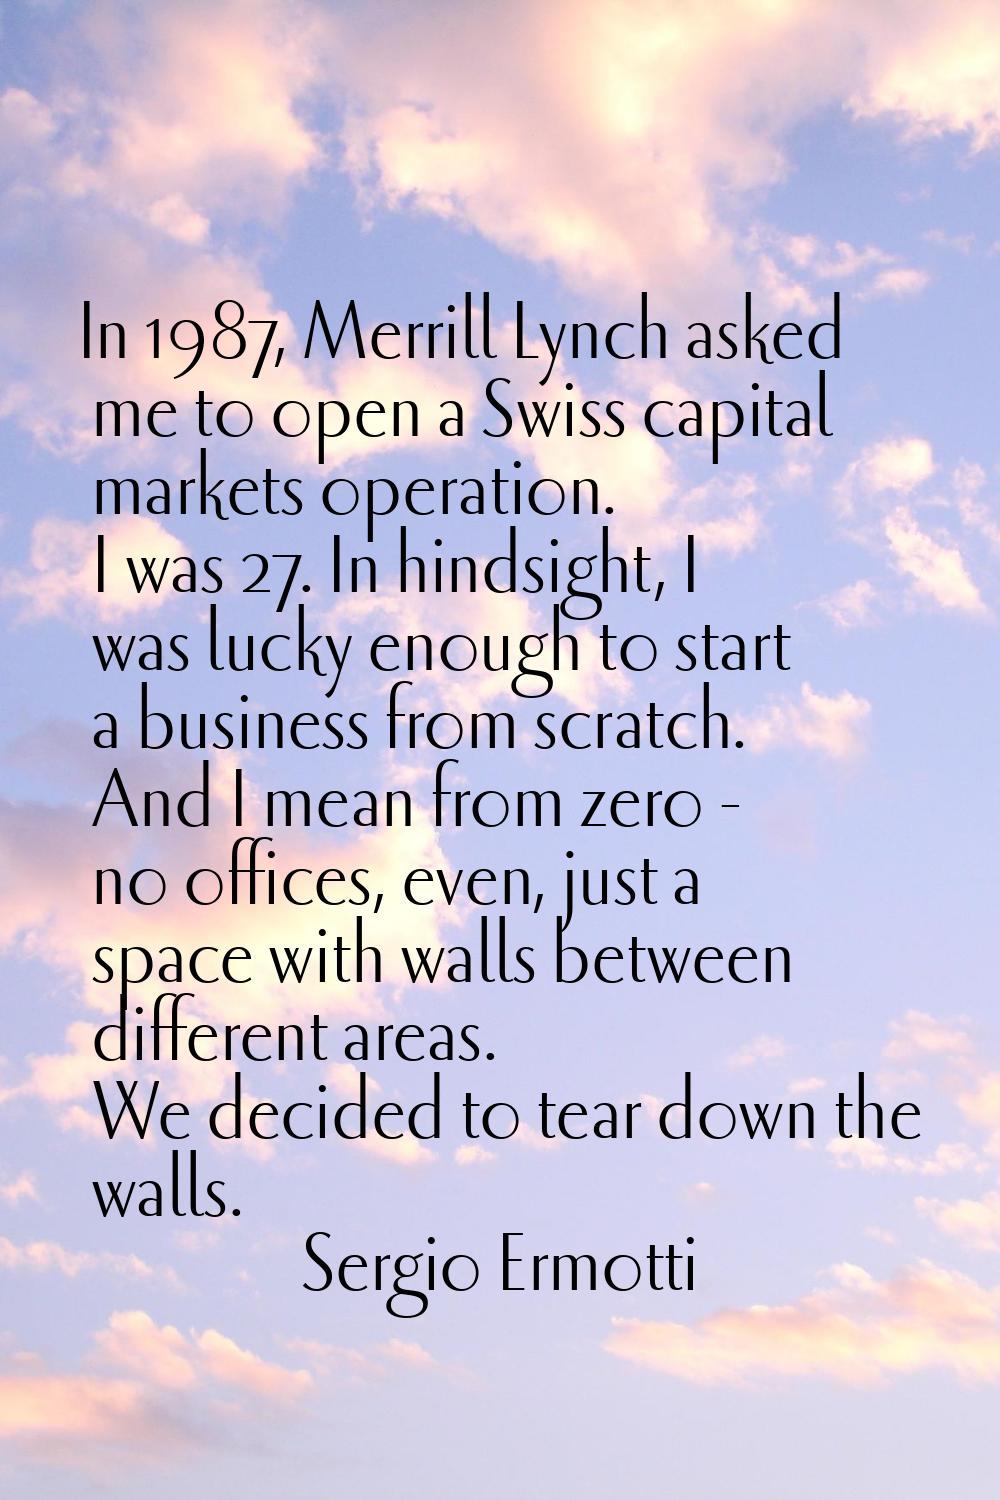 In 1987, Merrill Lynch asked me to open a Swiss capital markets operation. I was 27. In hindsight, 